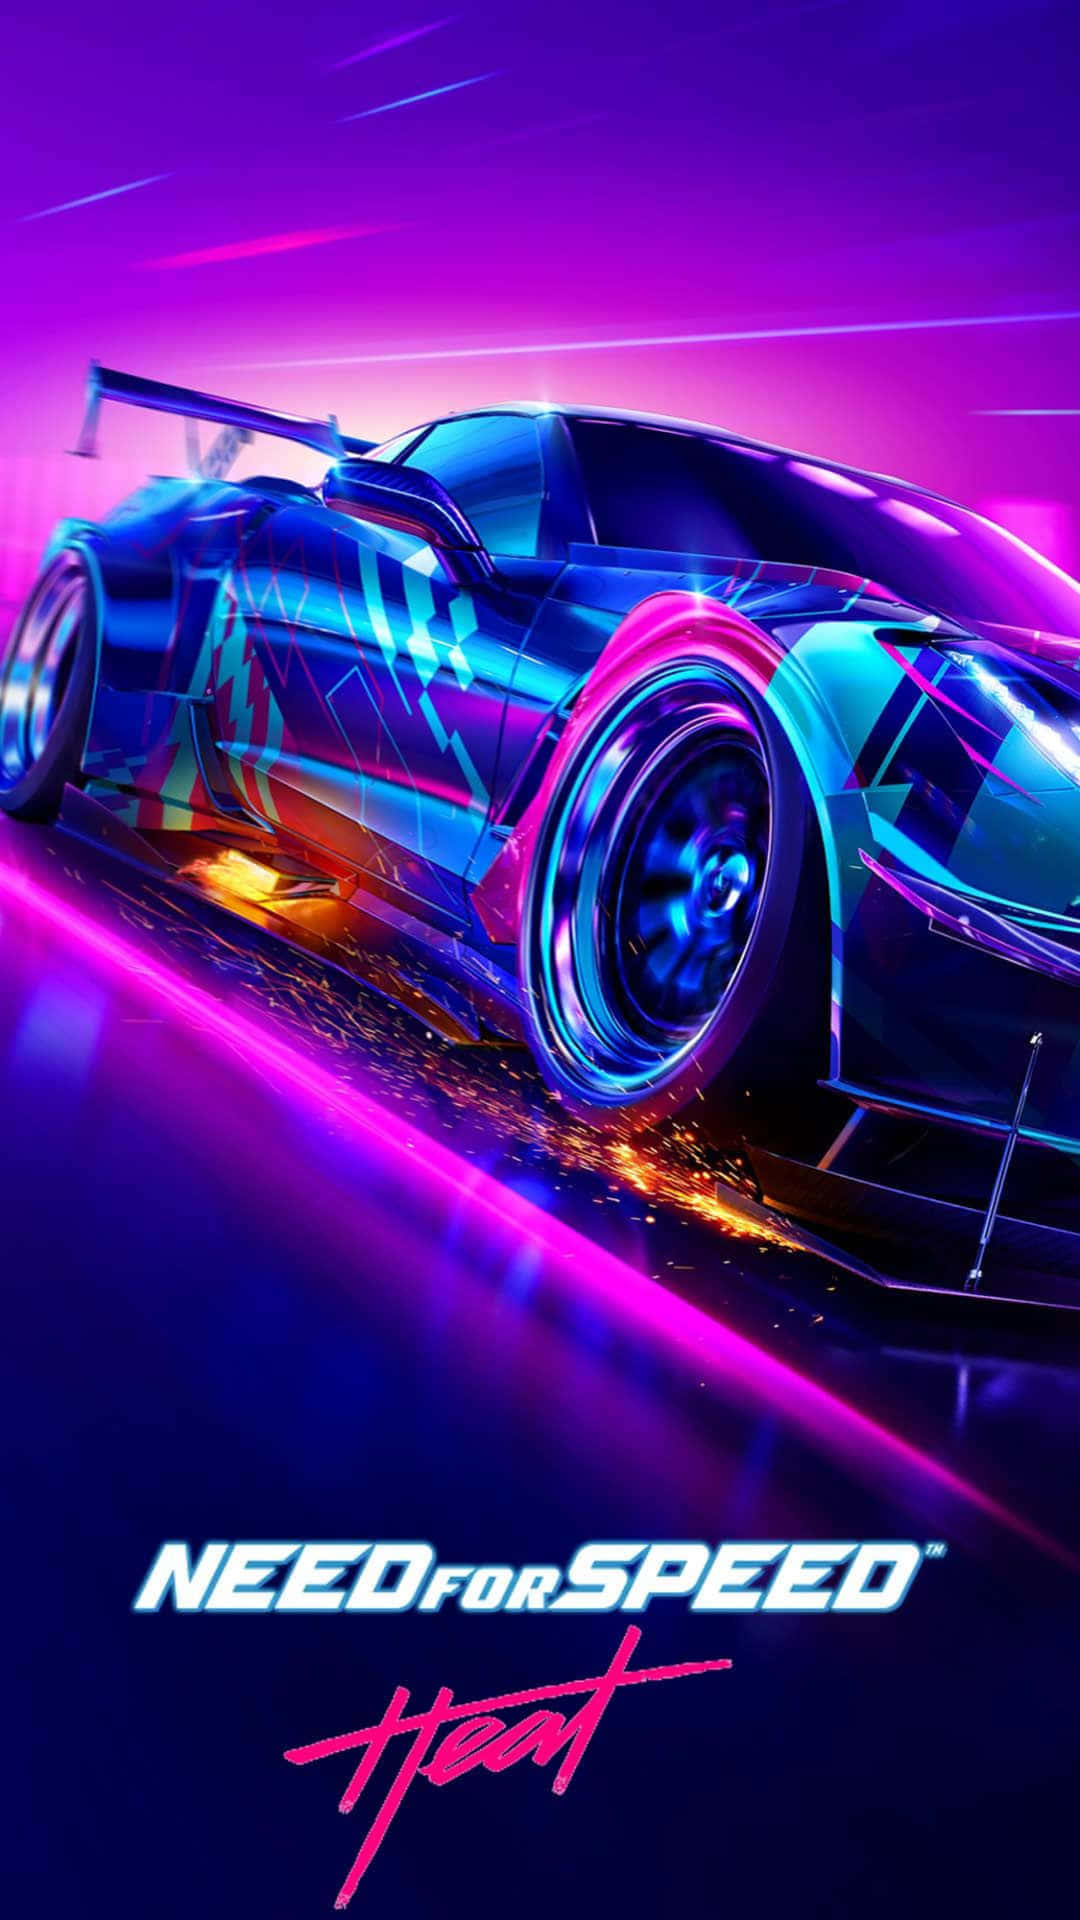 Fondode Pantalla Need For Speed Payback Del Iphone Xs, Póster De Coche Azul Nfs Heat.